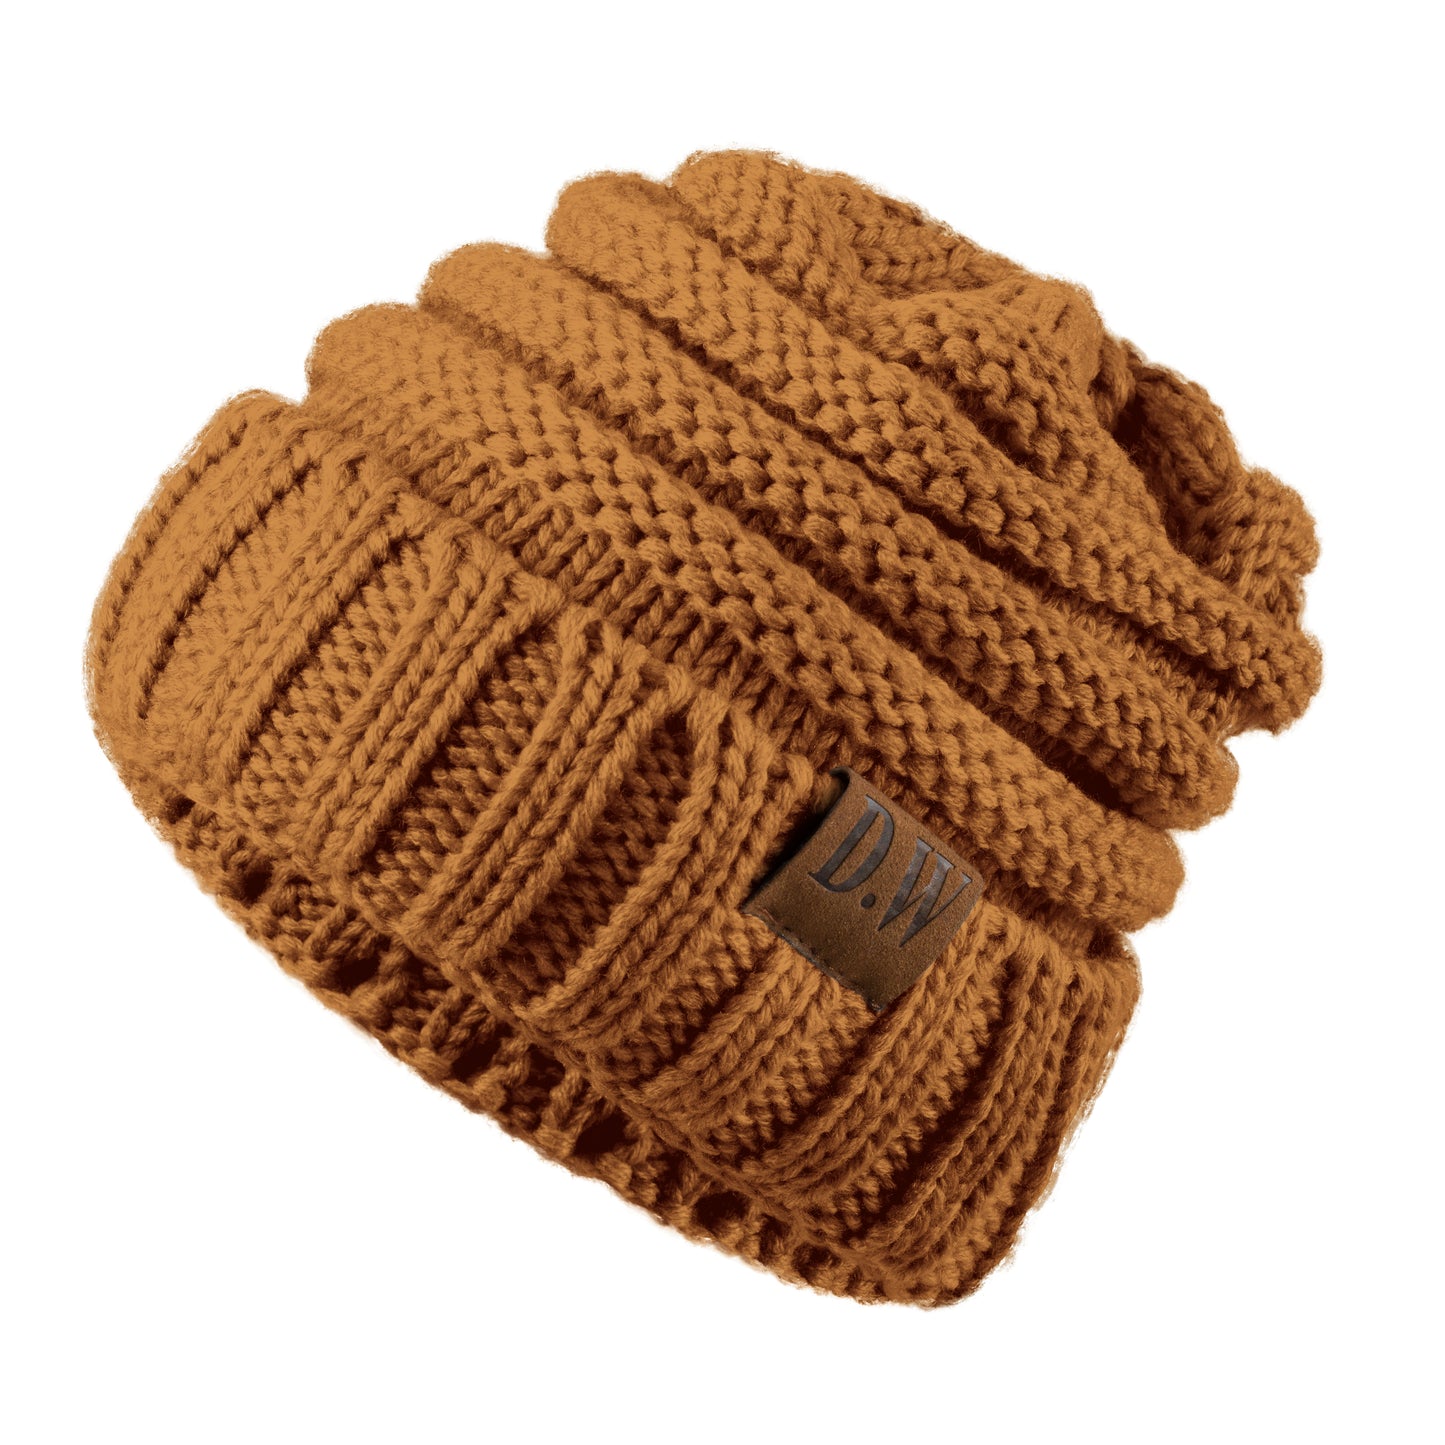 Kids Winter Beanie Hat- Warm for Cold Weather